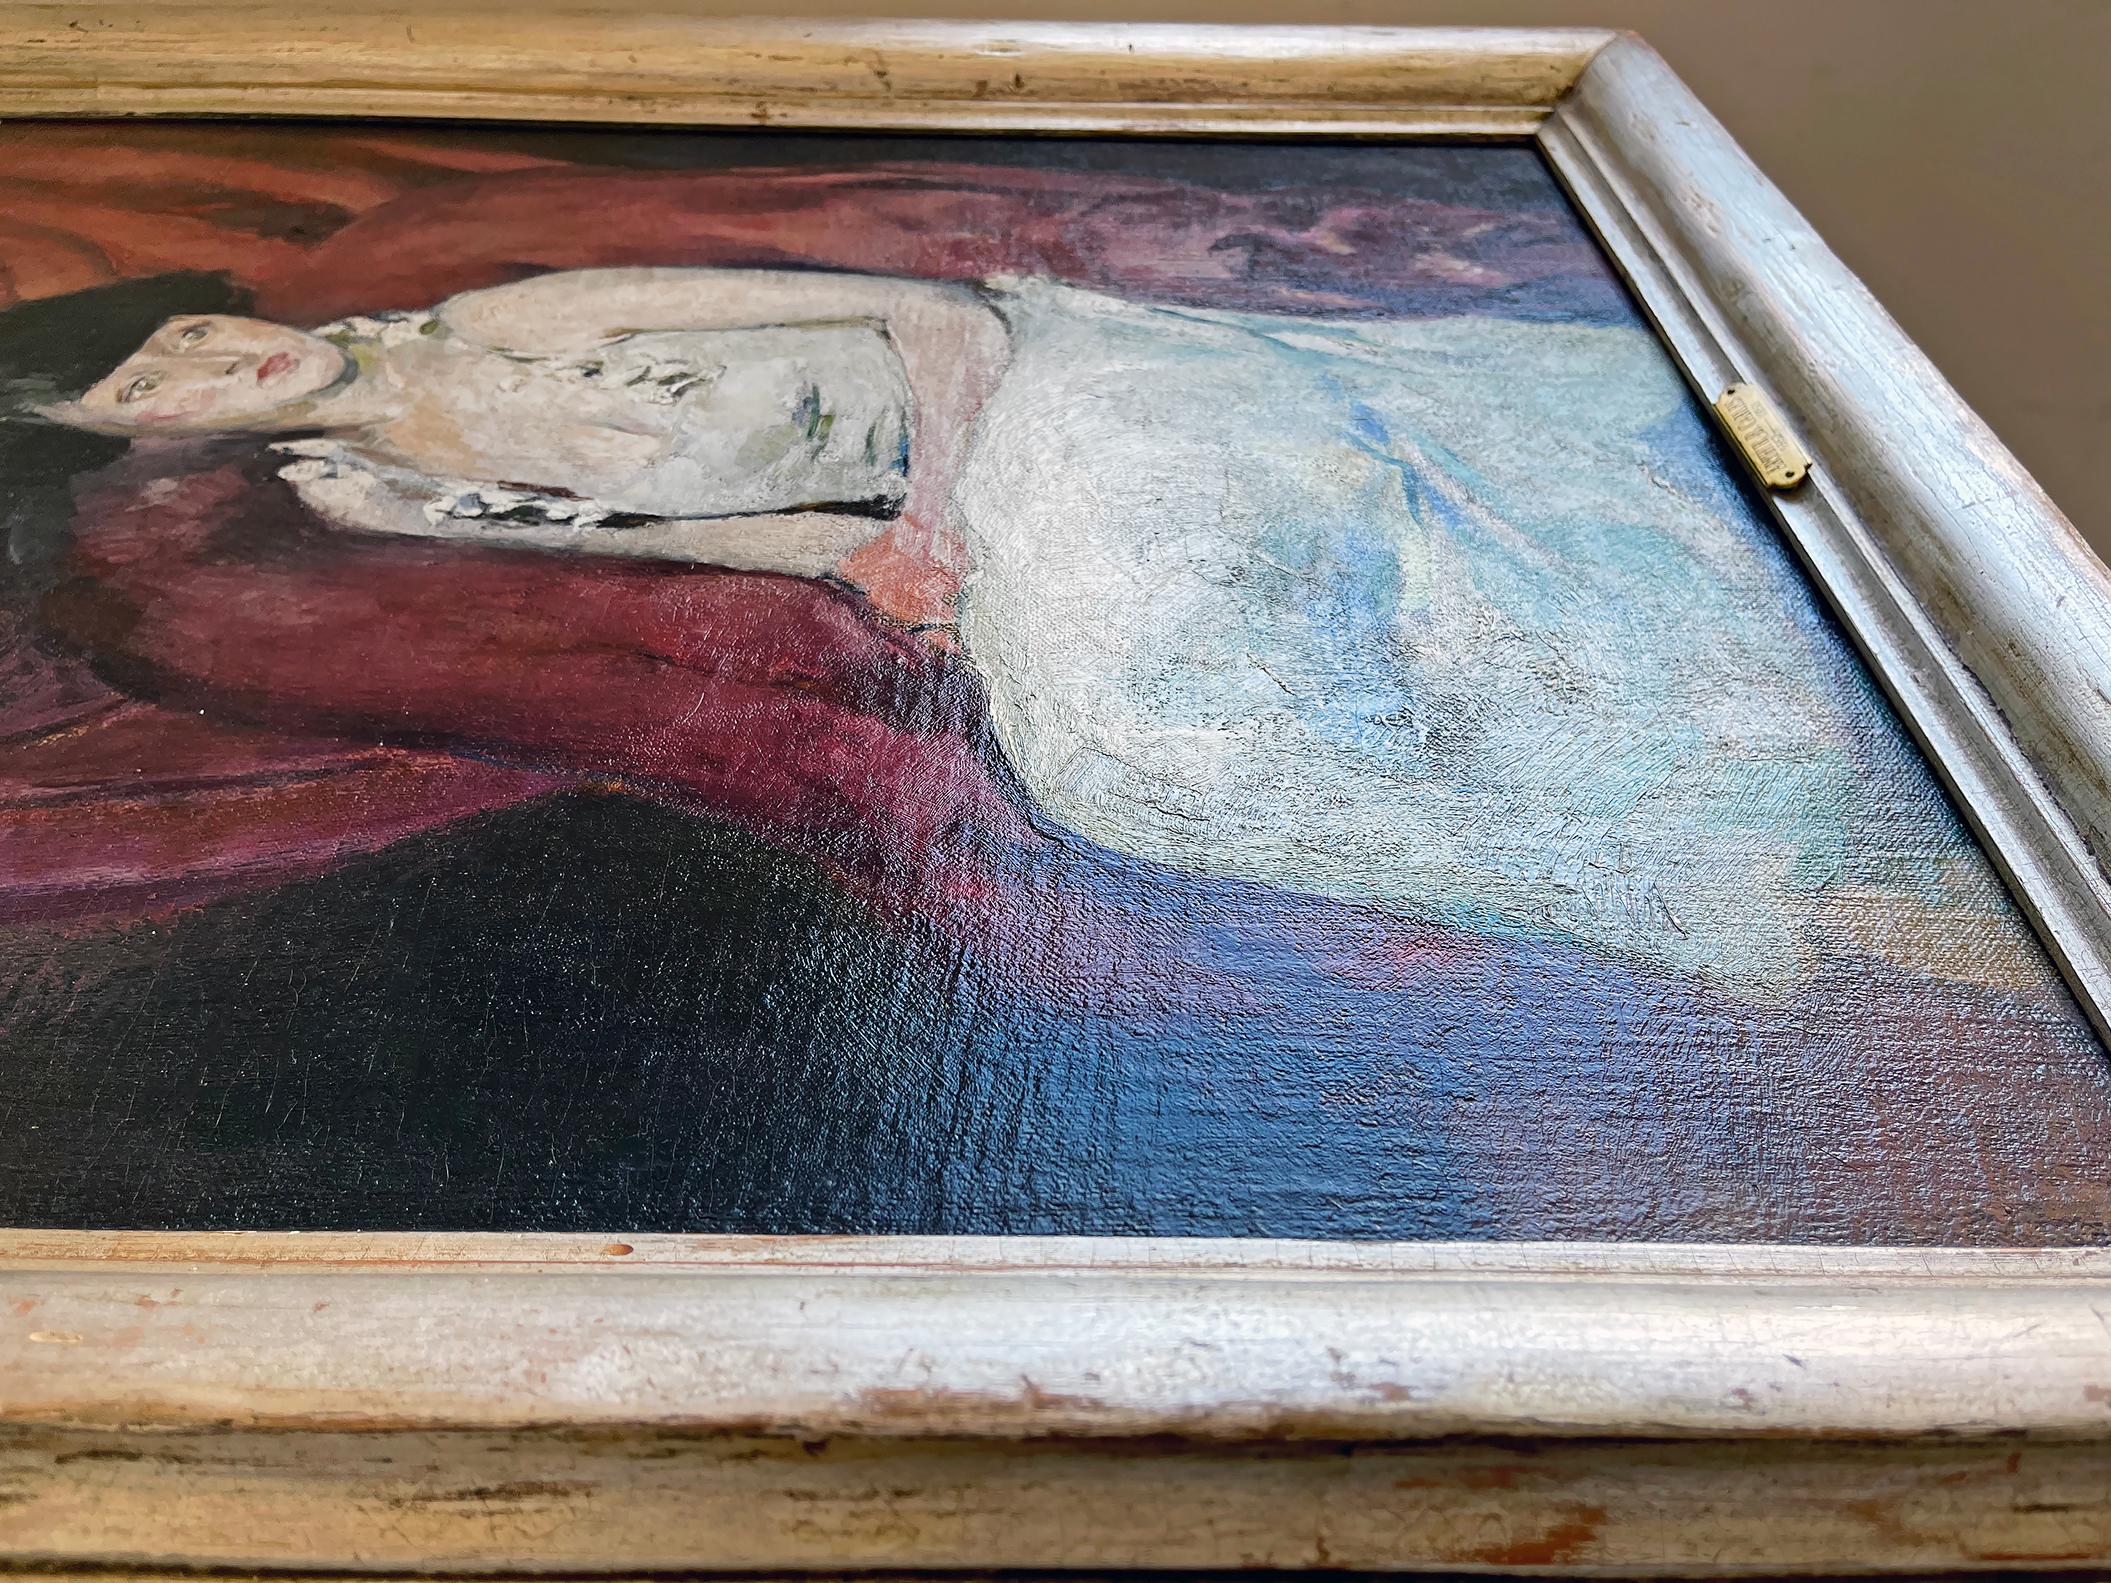 Charming portait with Modernest colors. 
Provenance: Christie's
Mercedes Matter, daughter of the artist, Salander-O'Reilly Galleries, New York. Private Collection. Sale: Skinner, Inc., Boston, Massachusetts, 7 March 2003, lot 583. Acquired by the